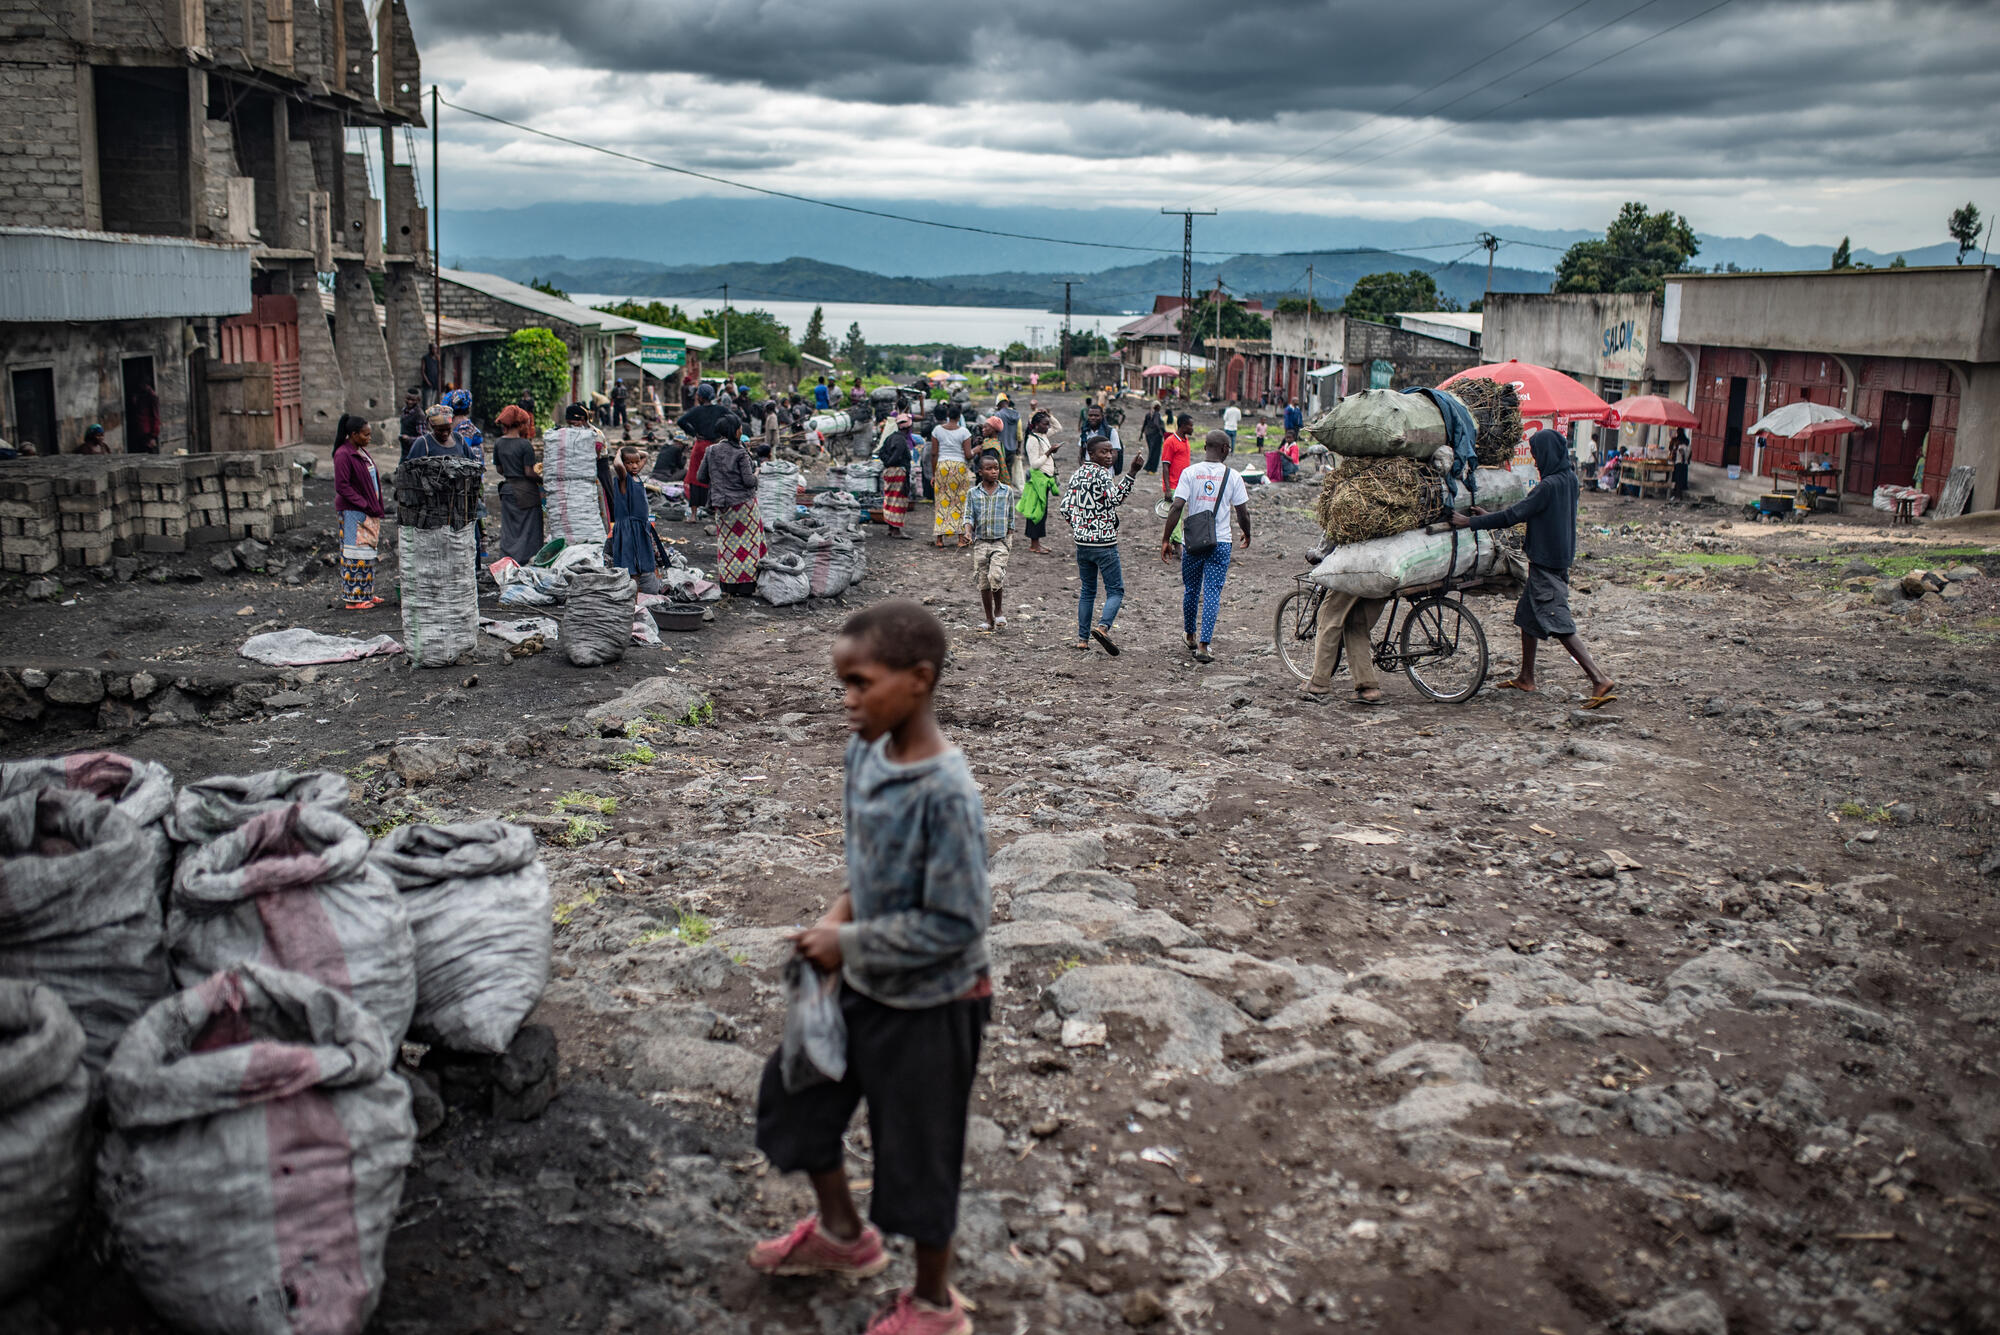 People on the street in Goma, Congo.